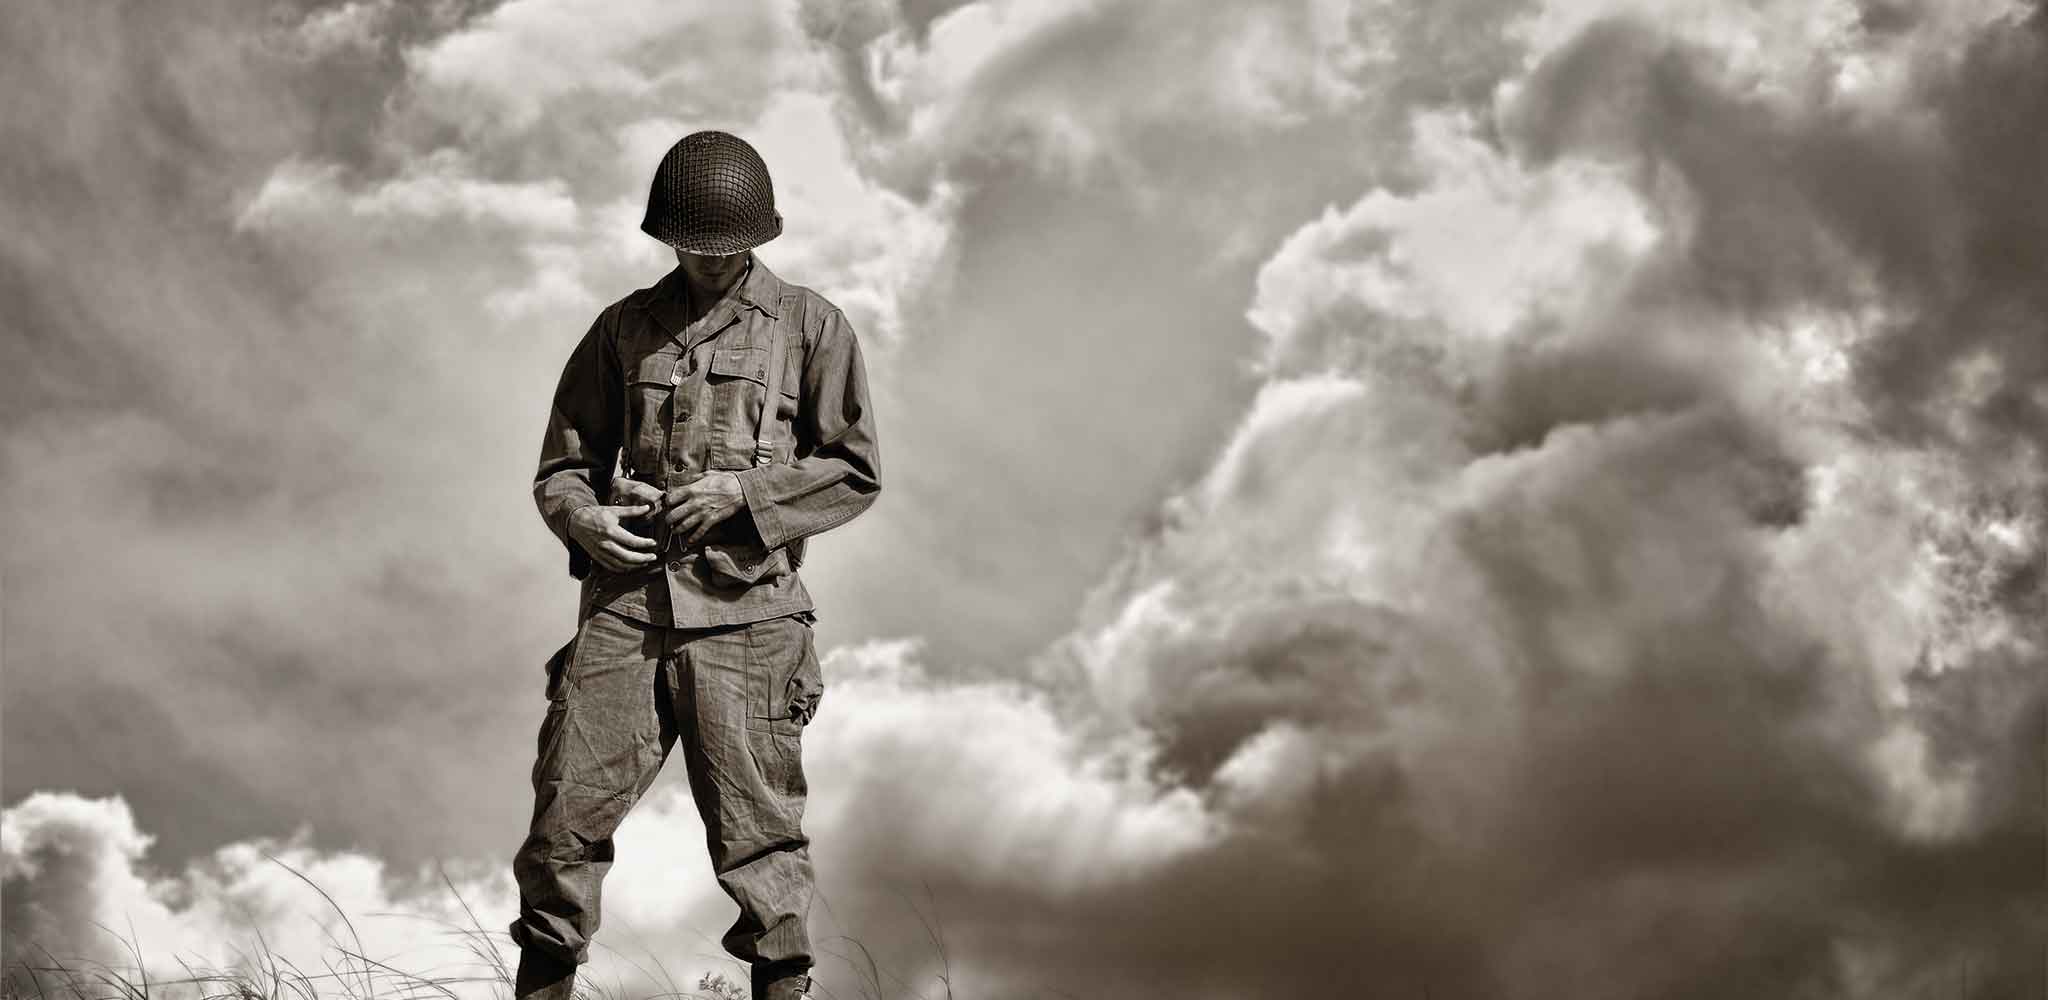 Dramtic Photograph Image WWII Soldier Standing Peacefully With Head Down Against Background Of Clouds In Sky